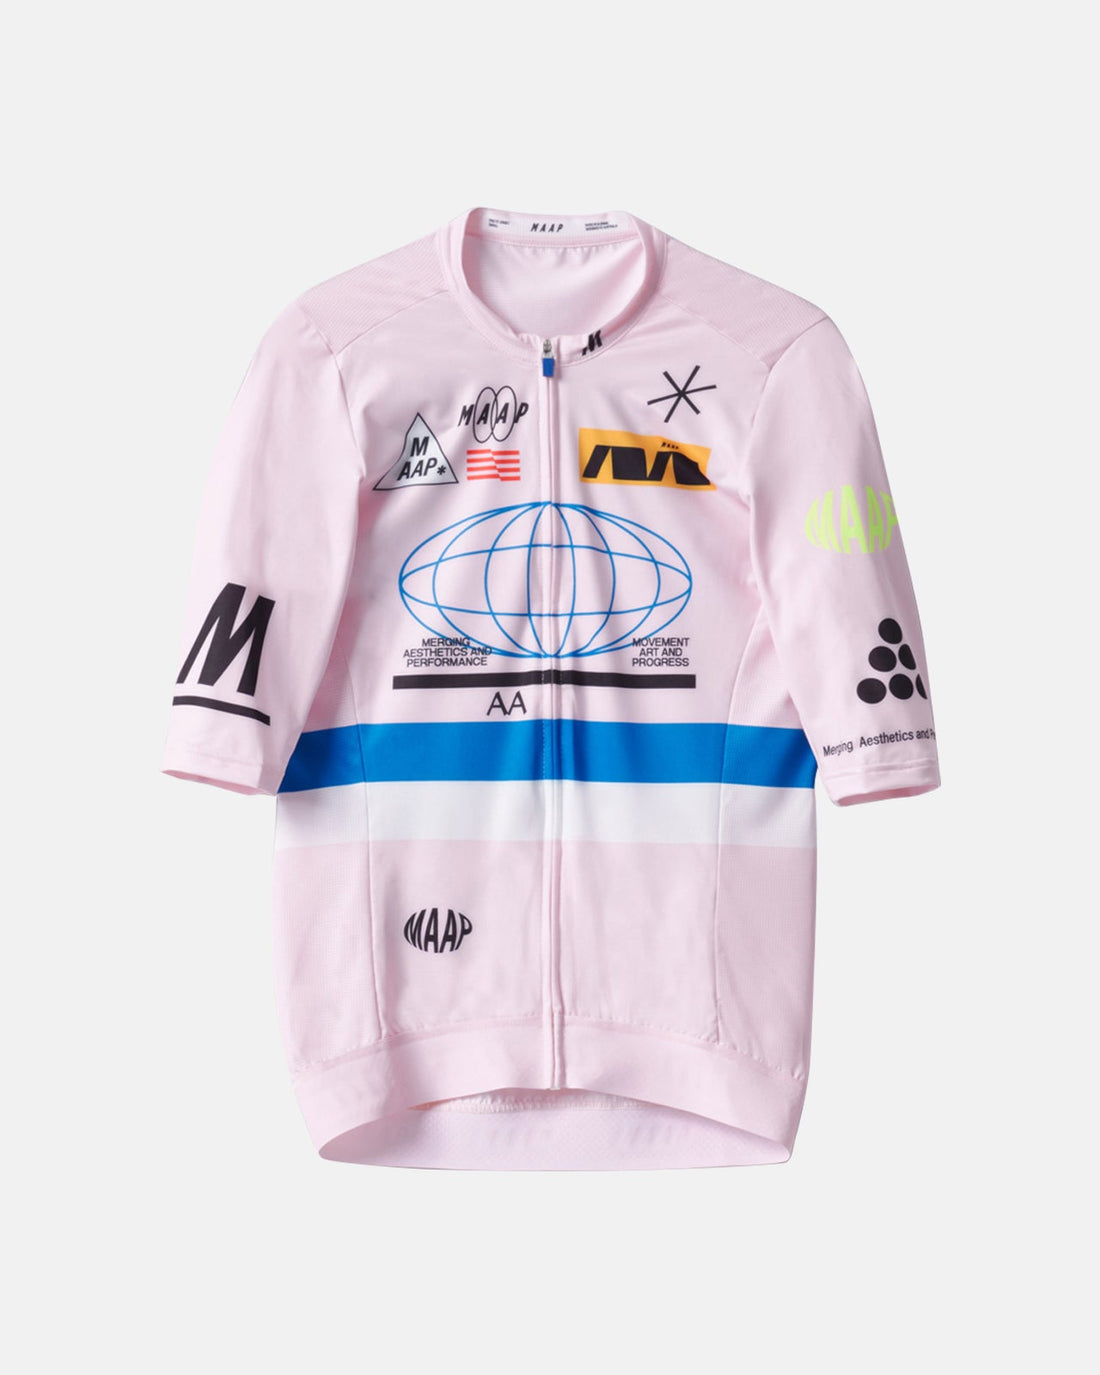 MAAP Axis Pro Jersey - Pale Pink | Enroute.cc